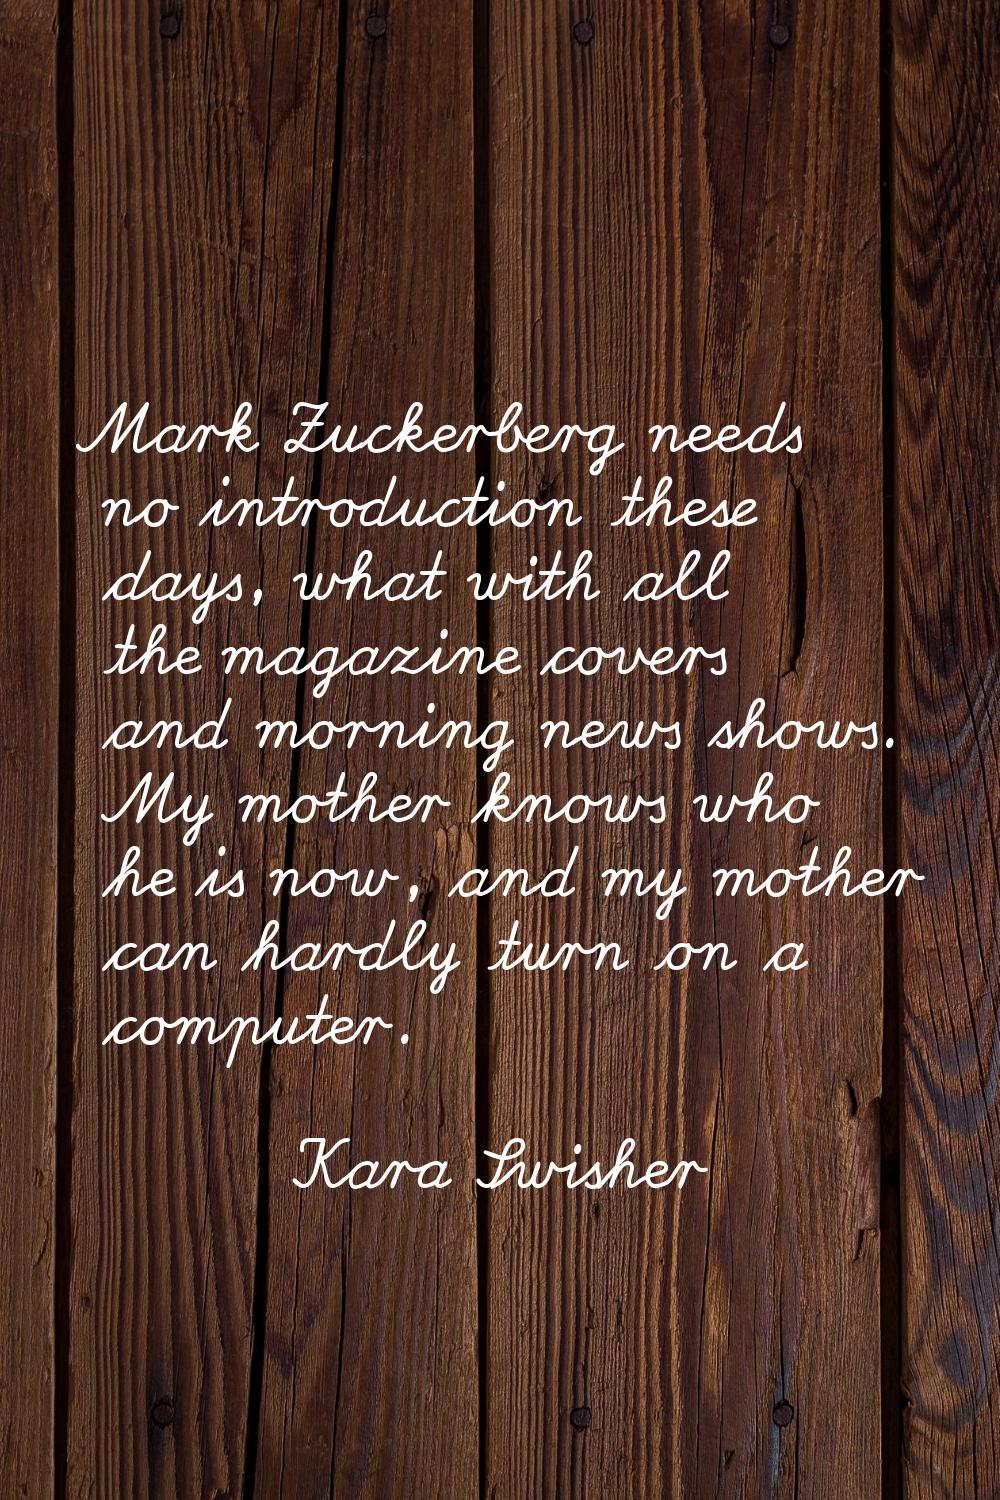 Mark Zuckerberg needs no introduction these days, what with all the magazine covers and morning new